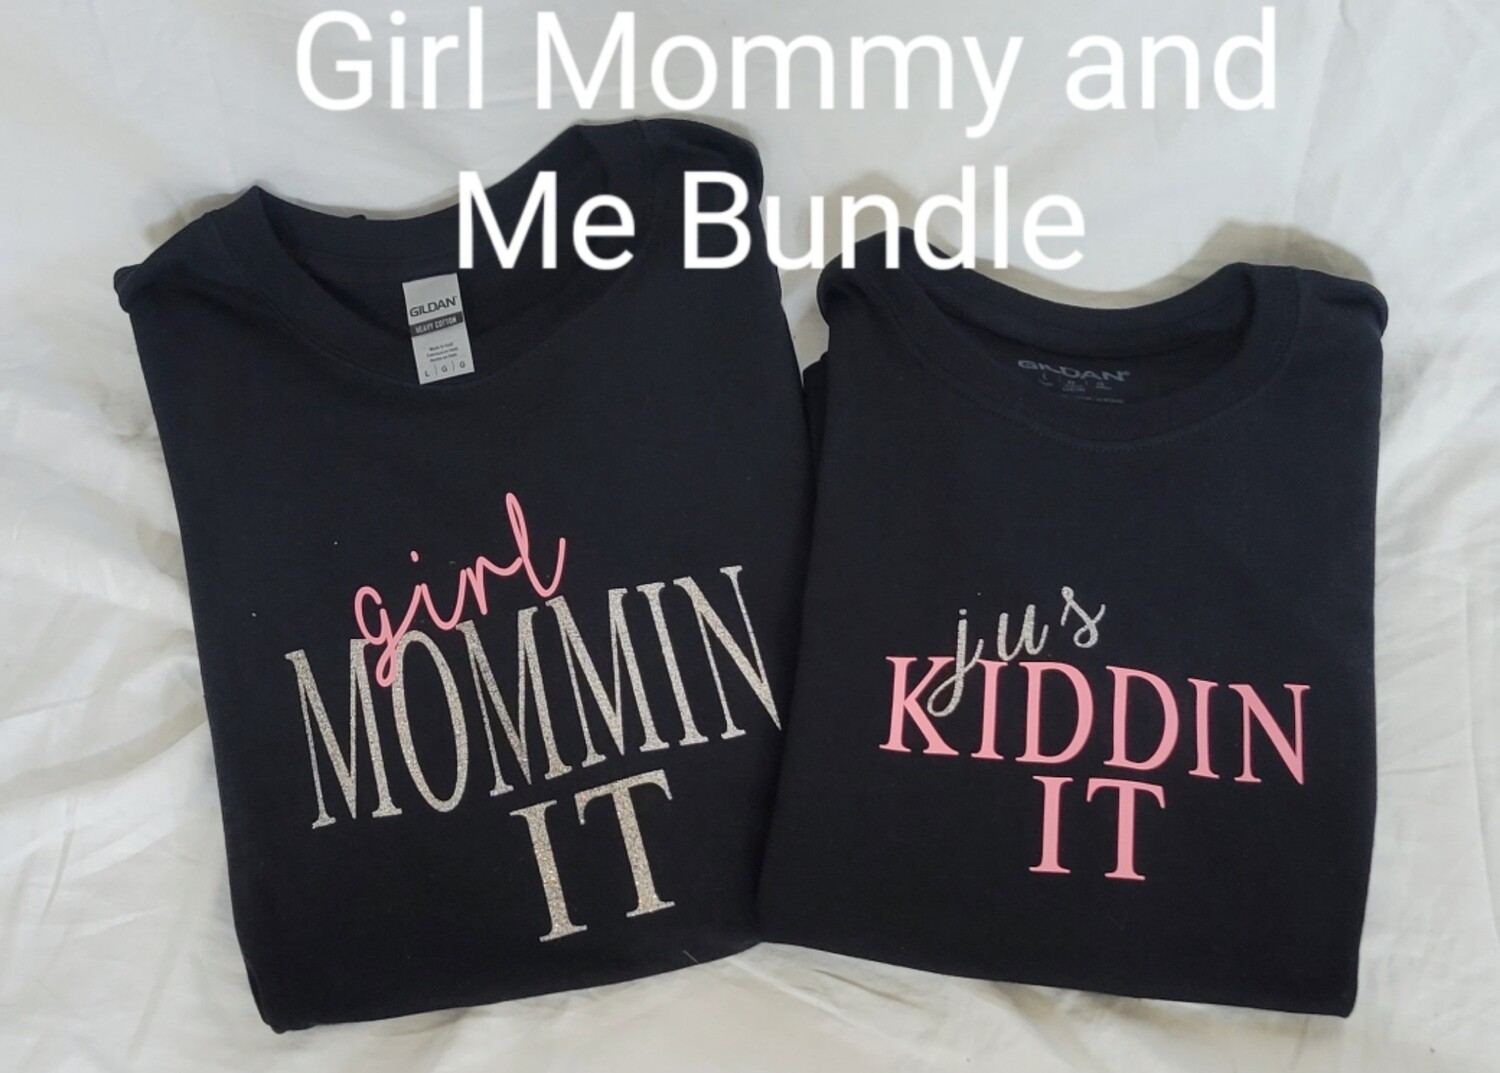 Girl Mommy and Me Bundle